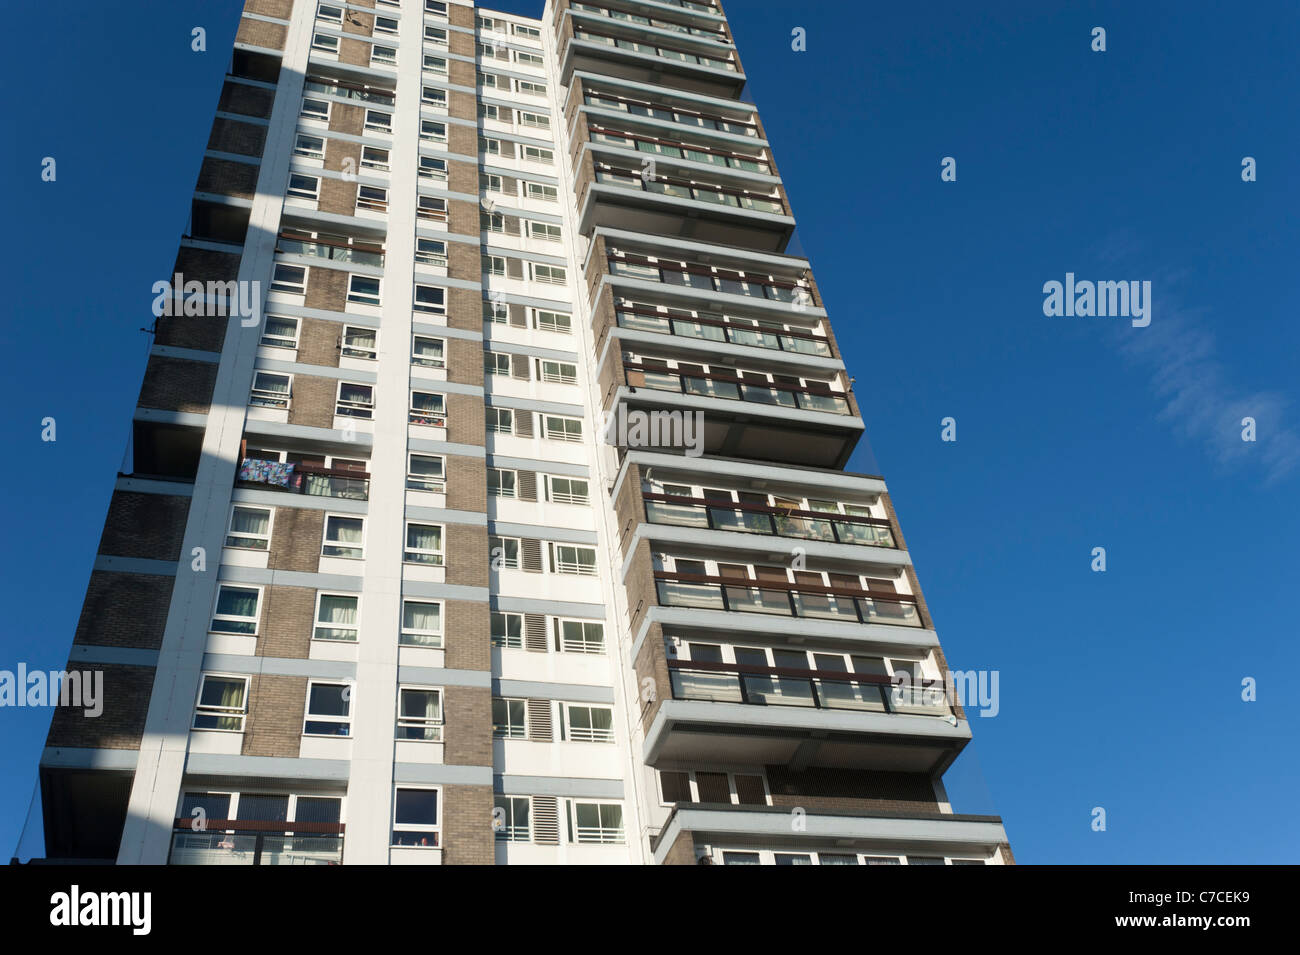 Tower block of flats or apartments that are mostly owned by the local council, near the Wandsworth Road in Lambeth, London, UK Stock Photo